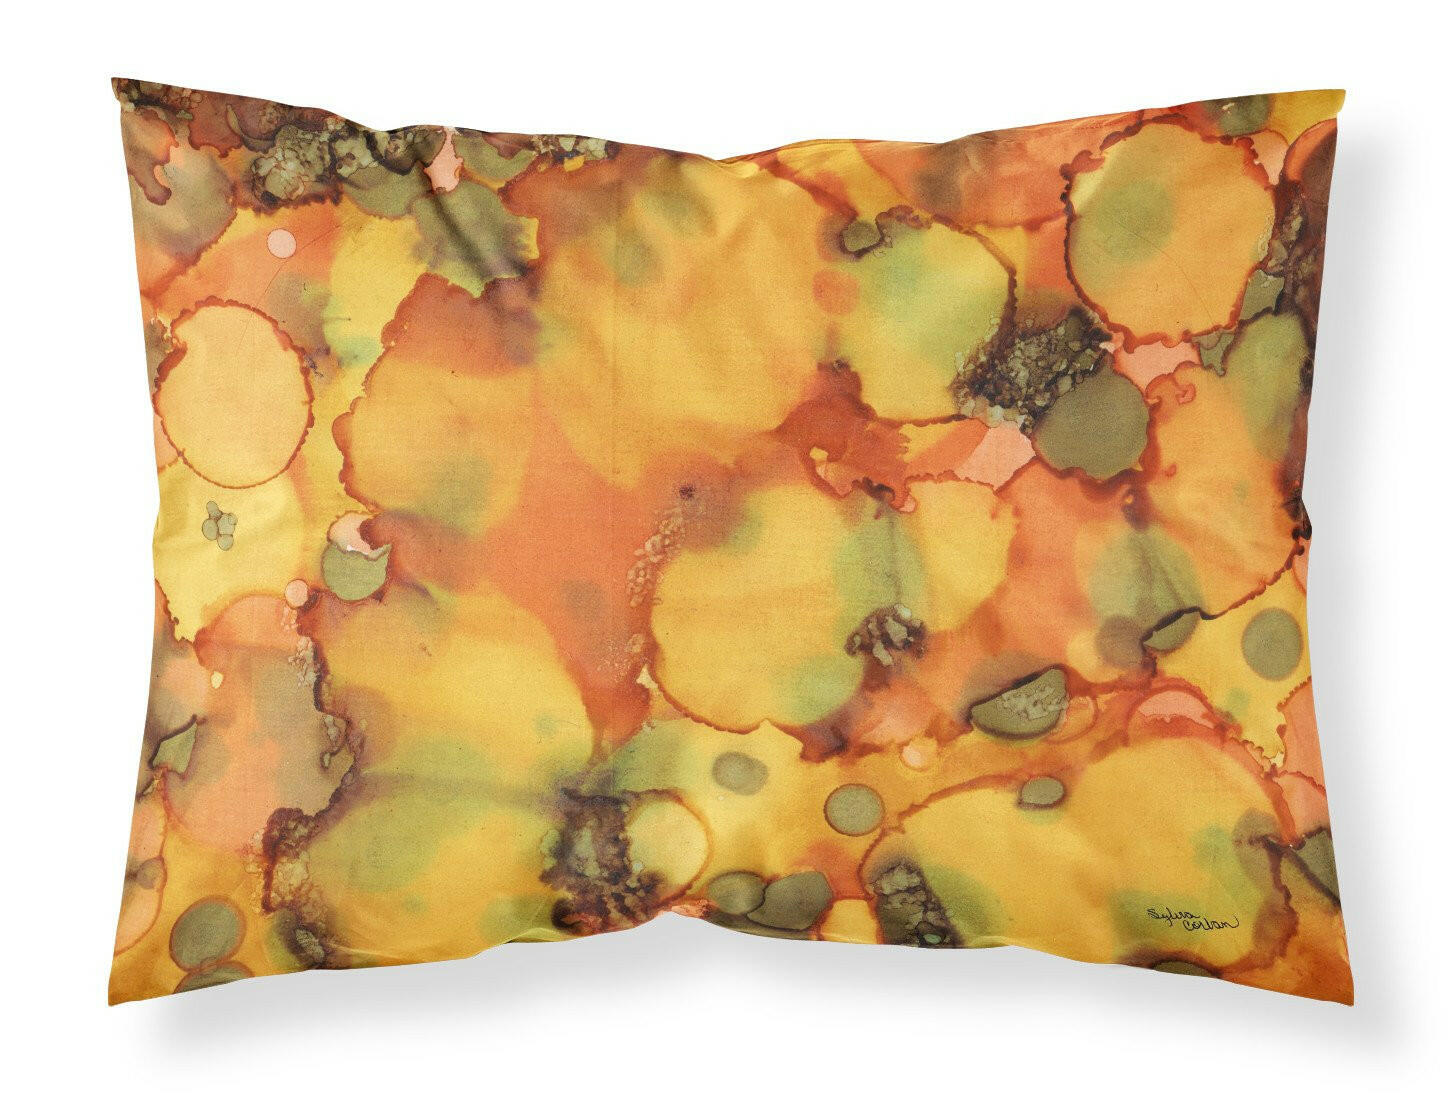 Abstract in Orange and Greens Fabric Standard Pillowcase 8976PILLOWCASE by Caroline's Treasures